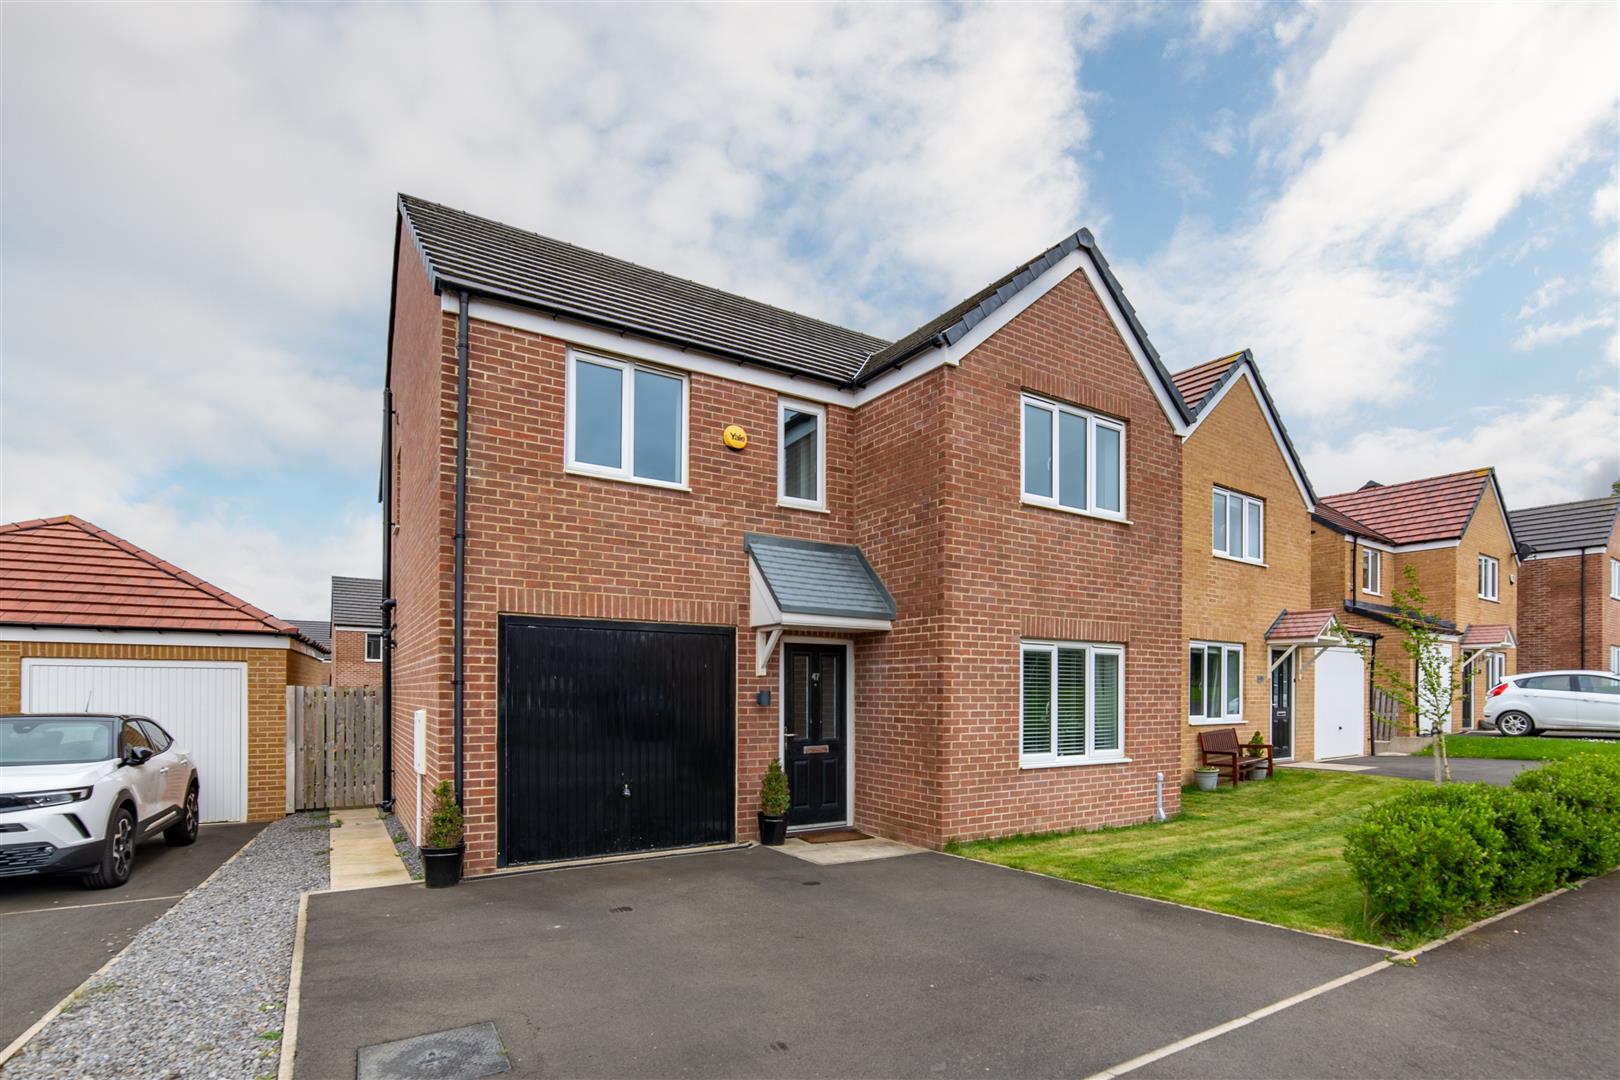 4 bed detached house for sale in Augusta Park Way, Newcastle Upon Tyne, NE13